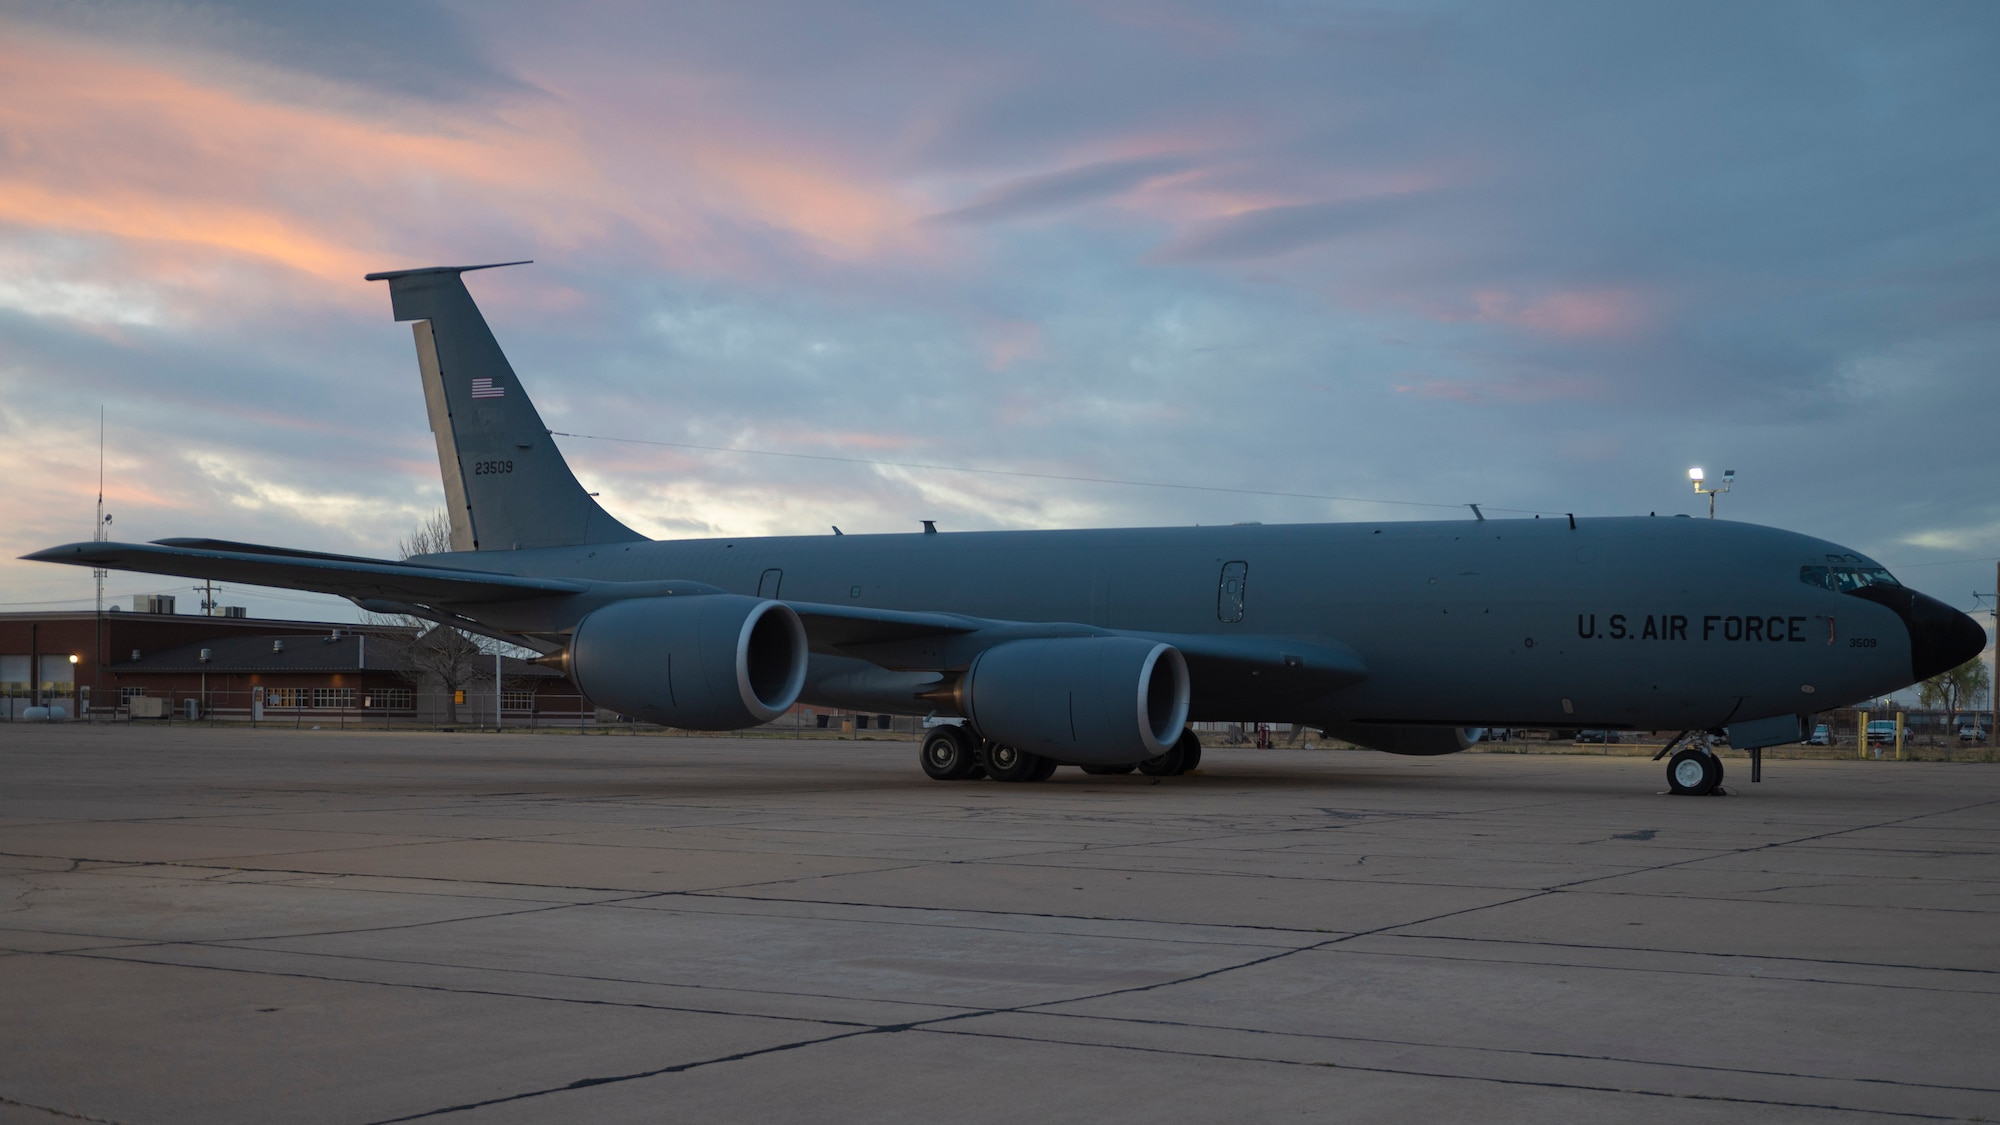 A U.S. Air Force KC-135 Stratotanker assigned to the 92nd Air Refueling Wing at Fairchild Air Force Base, Washington, is parked on the flightline at the Roswell Air Center in Roswell, New Mexico, March 14, 2023. The KC-135 Stratotanker remains a vital part of the tanker fleet while extending the reach of fighters, bombers and other aircraft through aerial refueling. (U.S. Air Force photo by 2nd Lt. Ariana Wilkinson)